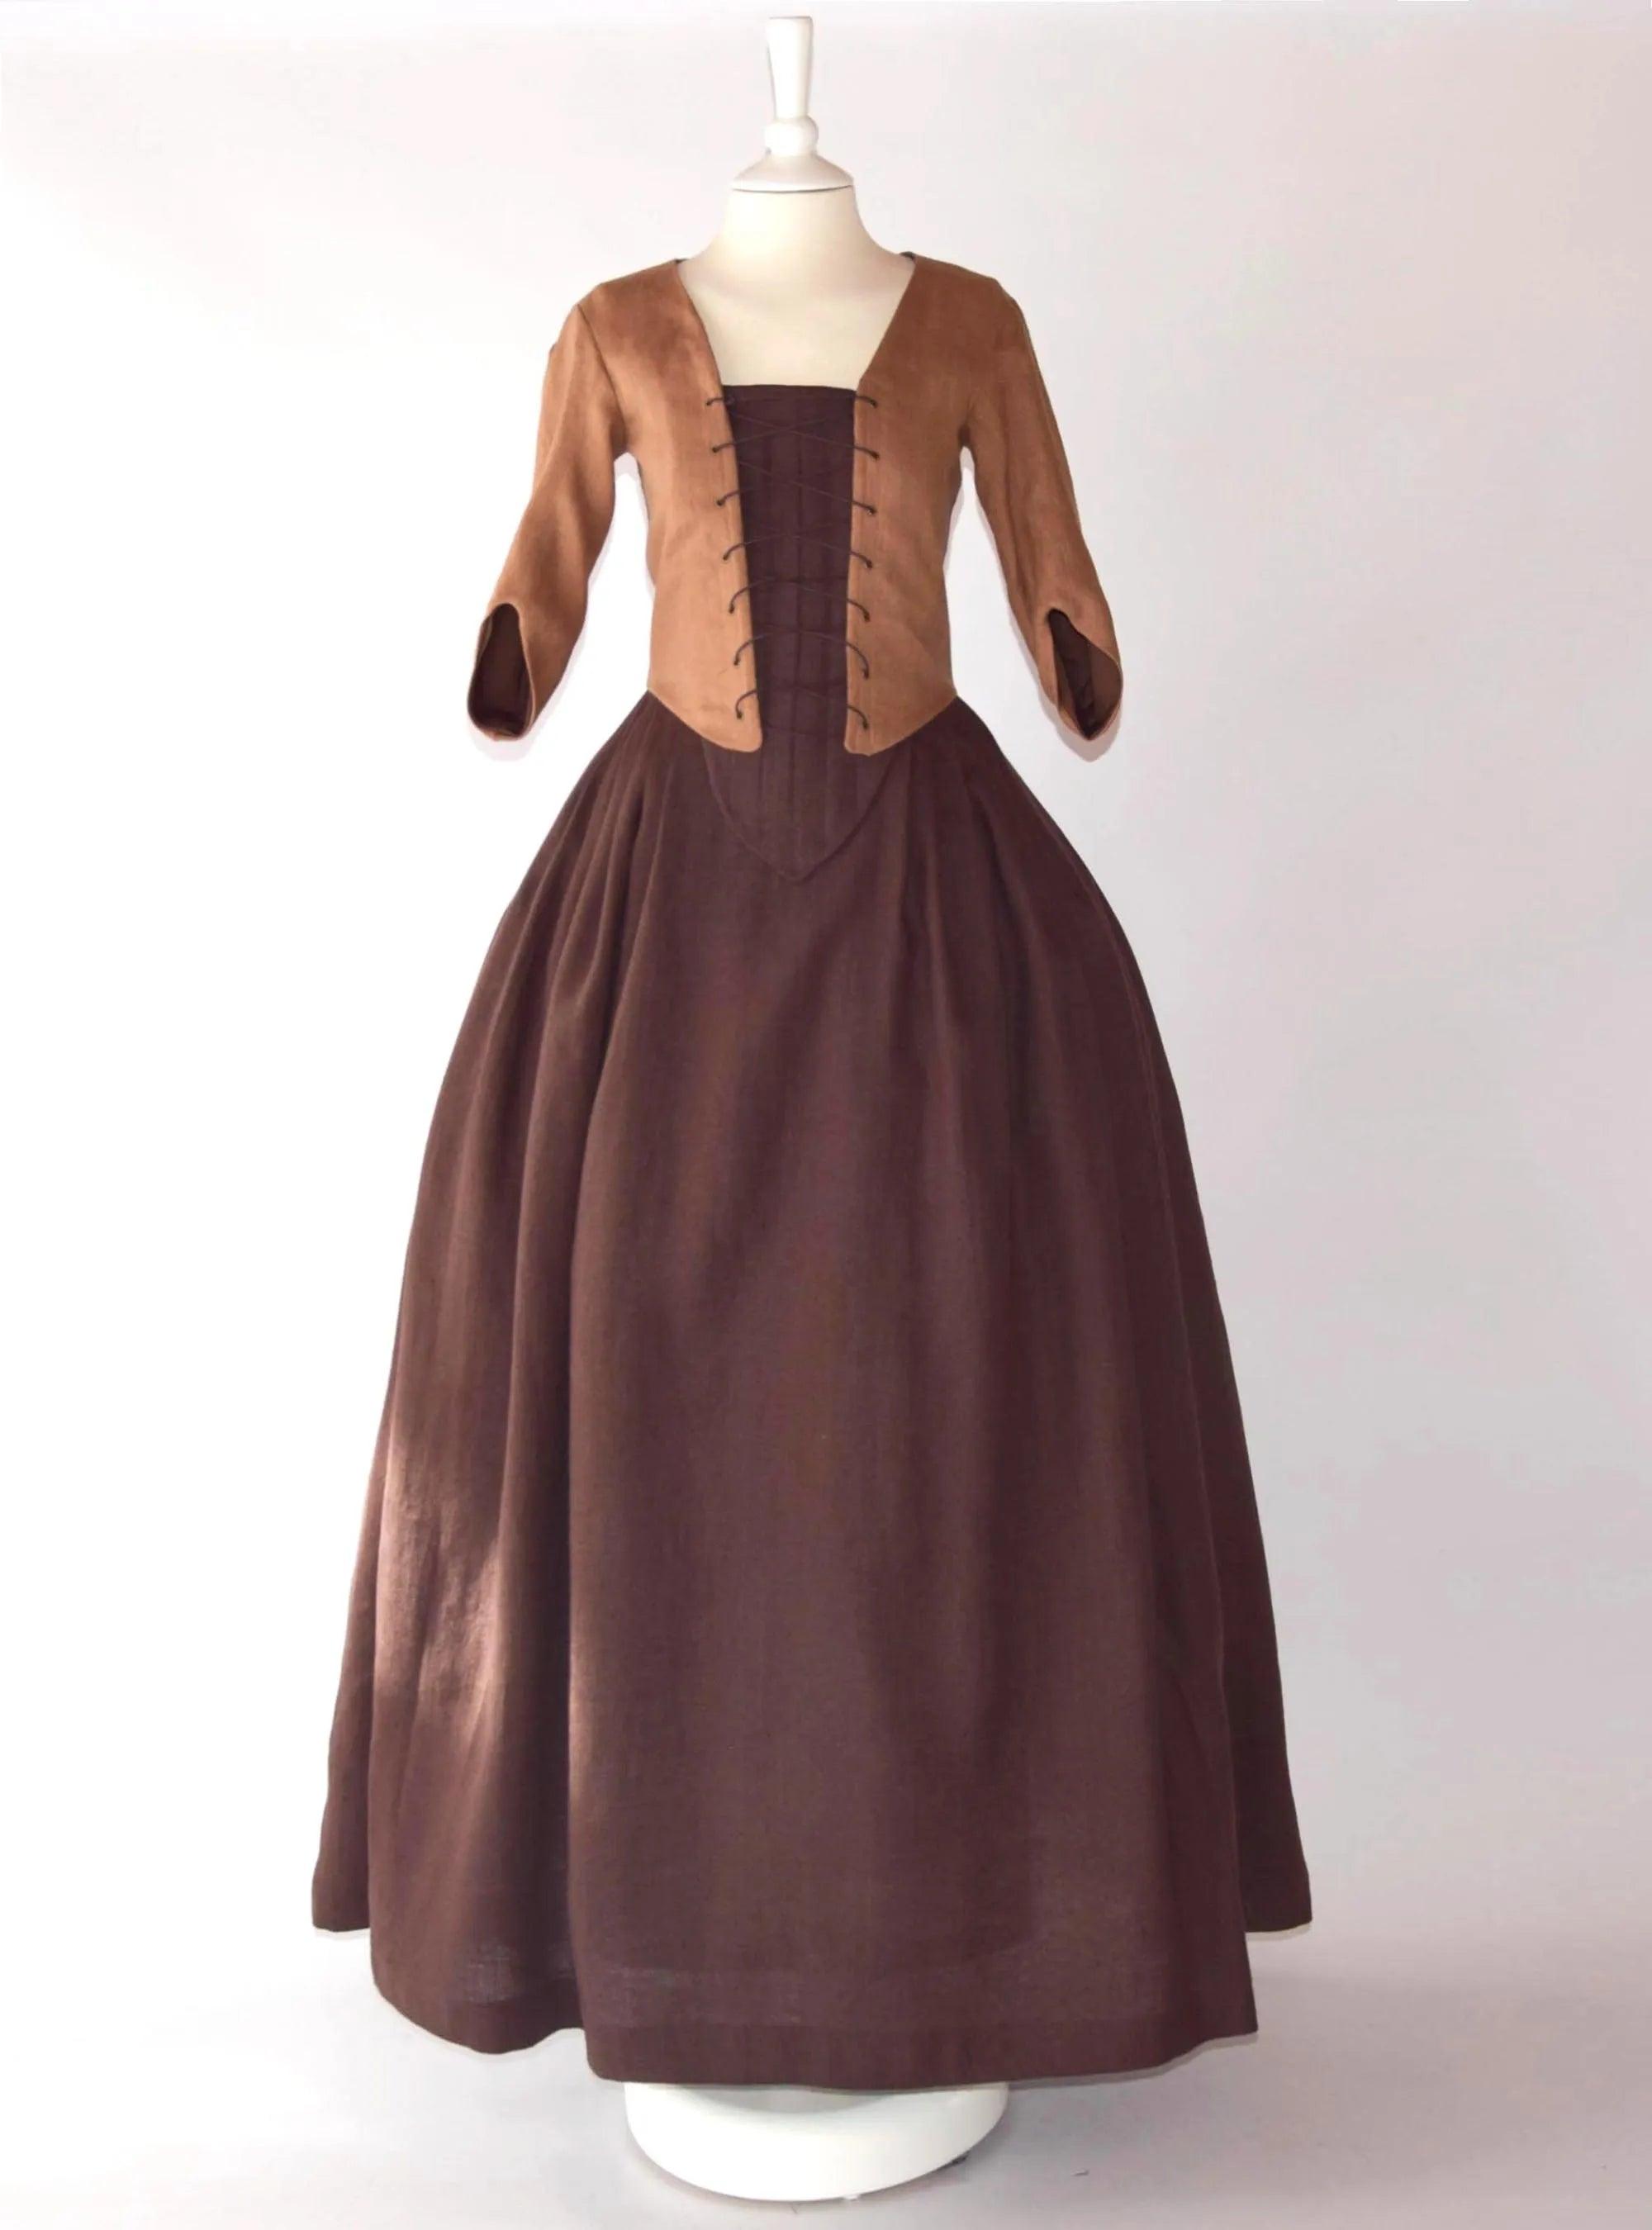 Historical Costume in Toffee &amp; Chocolate Linen - Atelier Serraspina